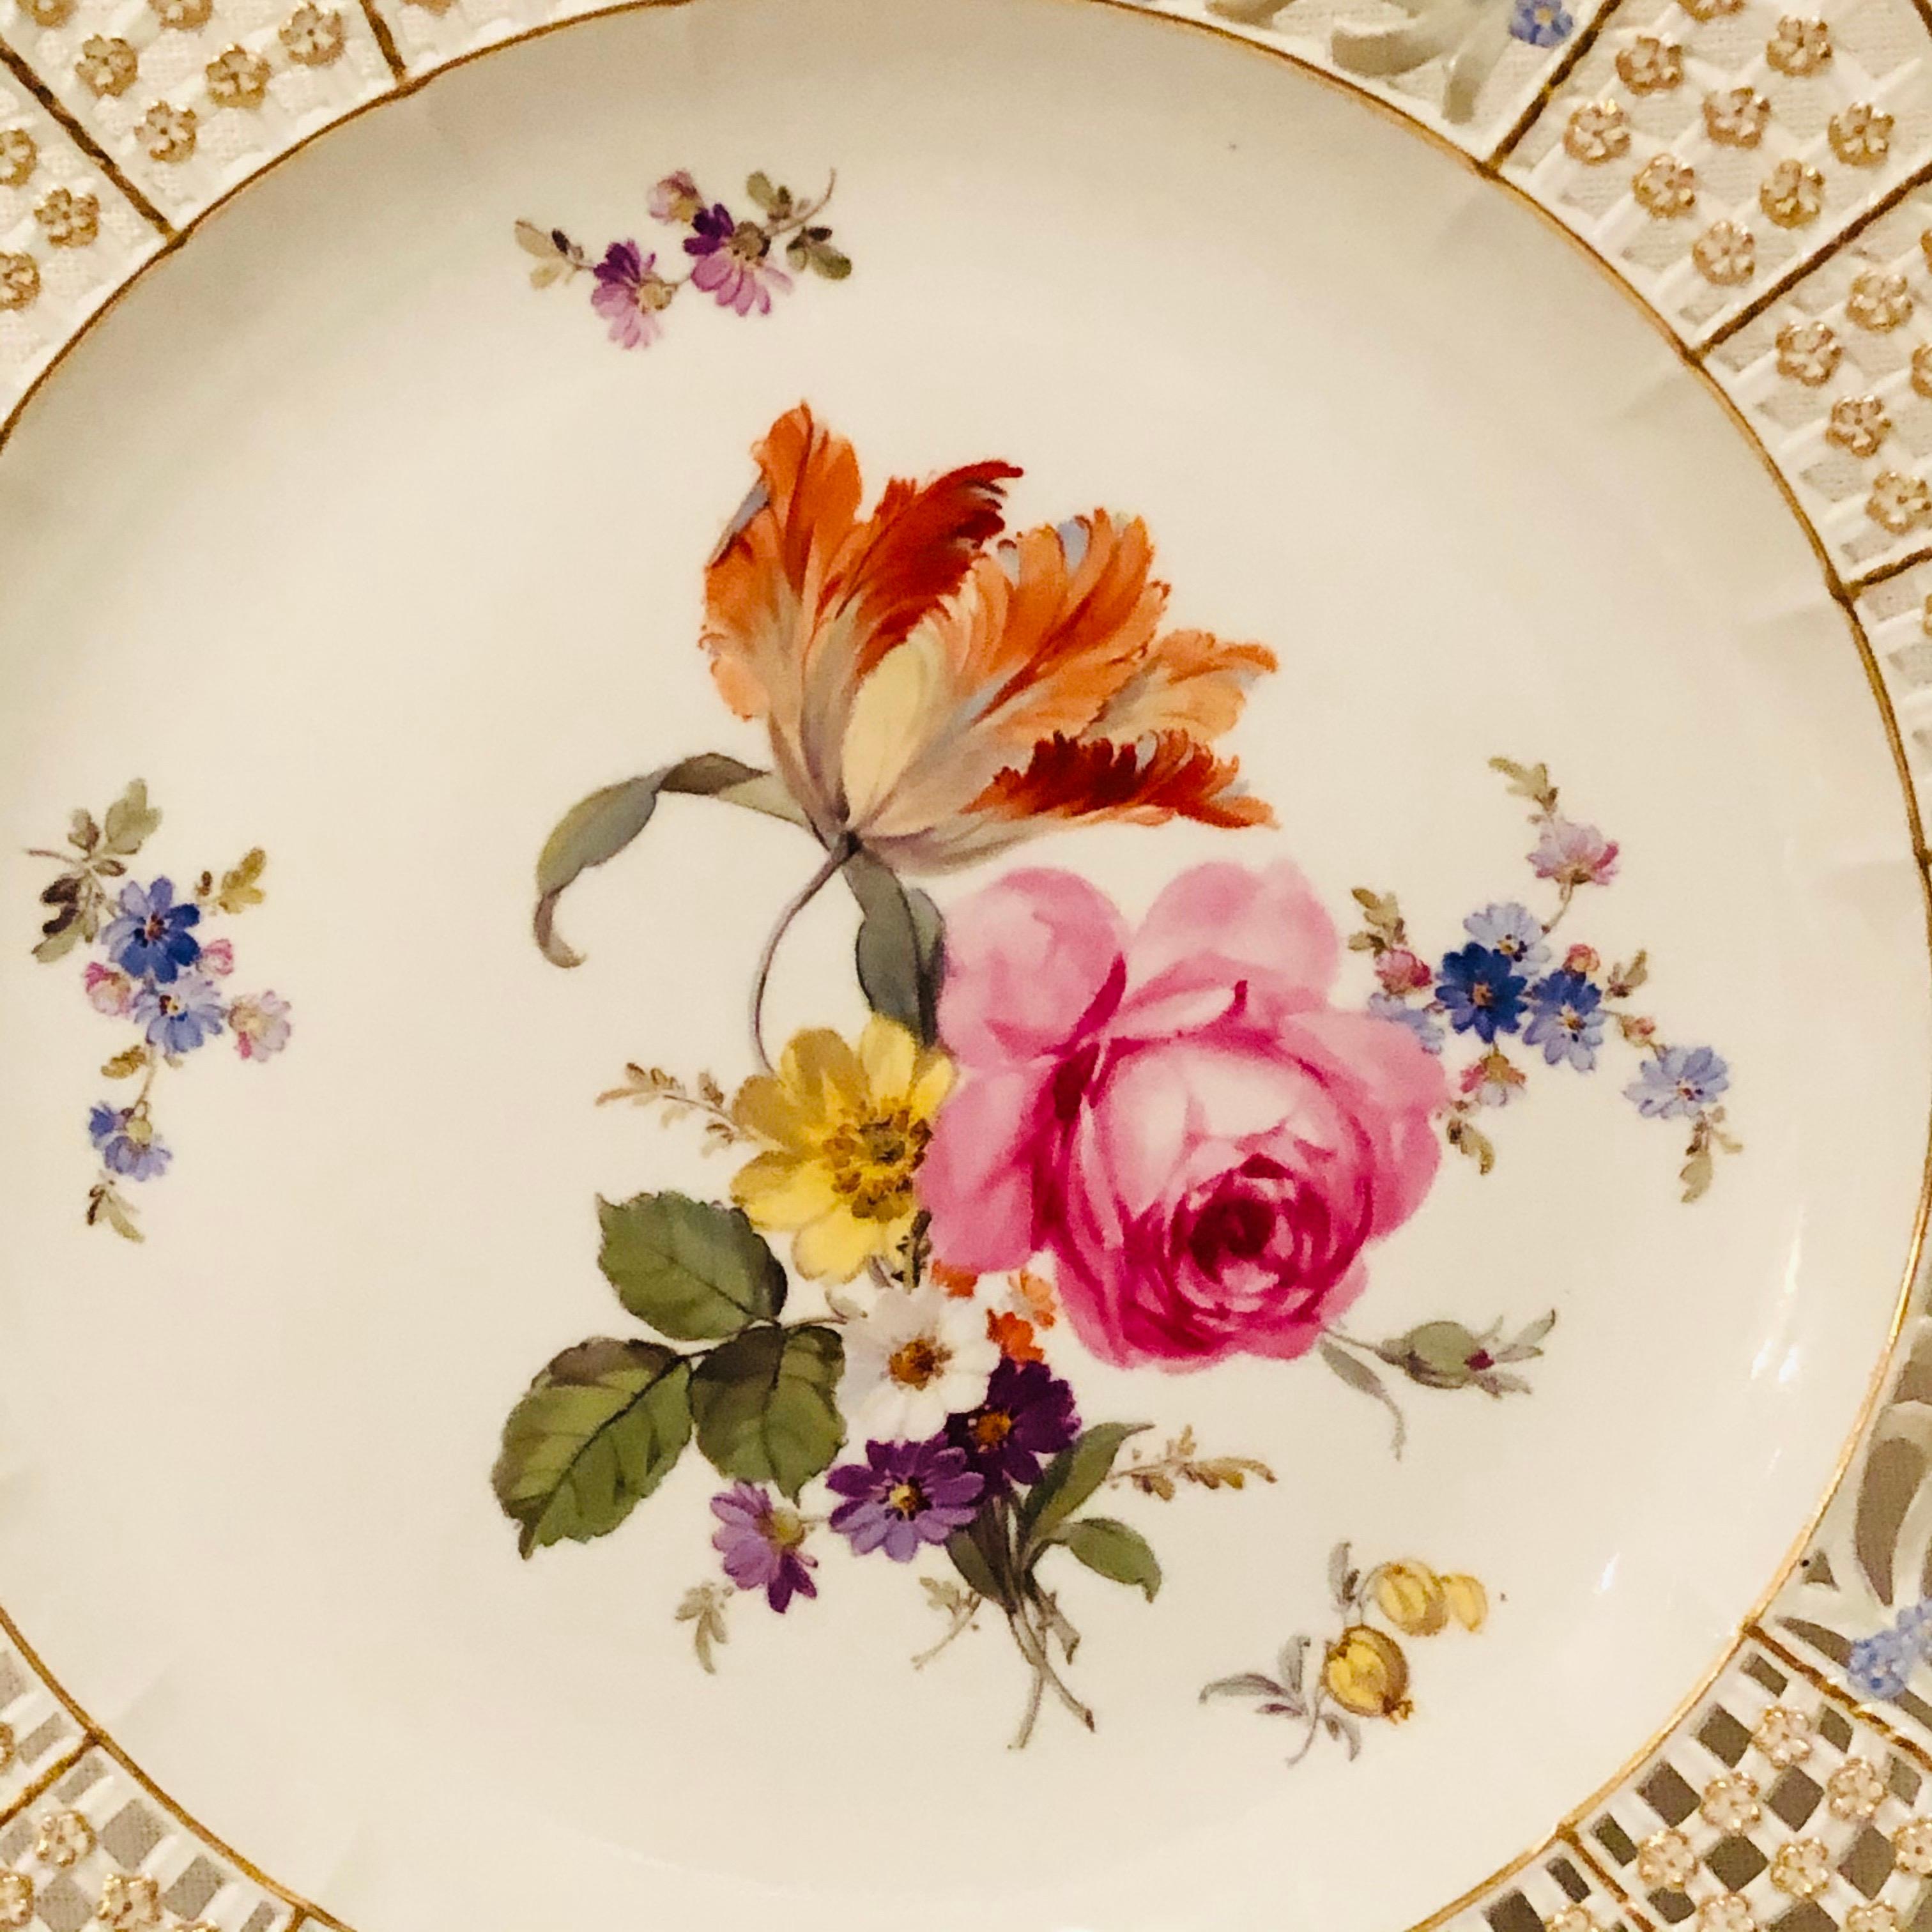 This is an exquisite Meissen cabinet plate painted with a large beautiful flower bouquet with a large tulip and other flowers. The Meissen plate has a very intricate reticulated or open work border profusely decorated with raised gold and blue